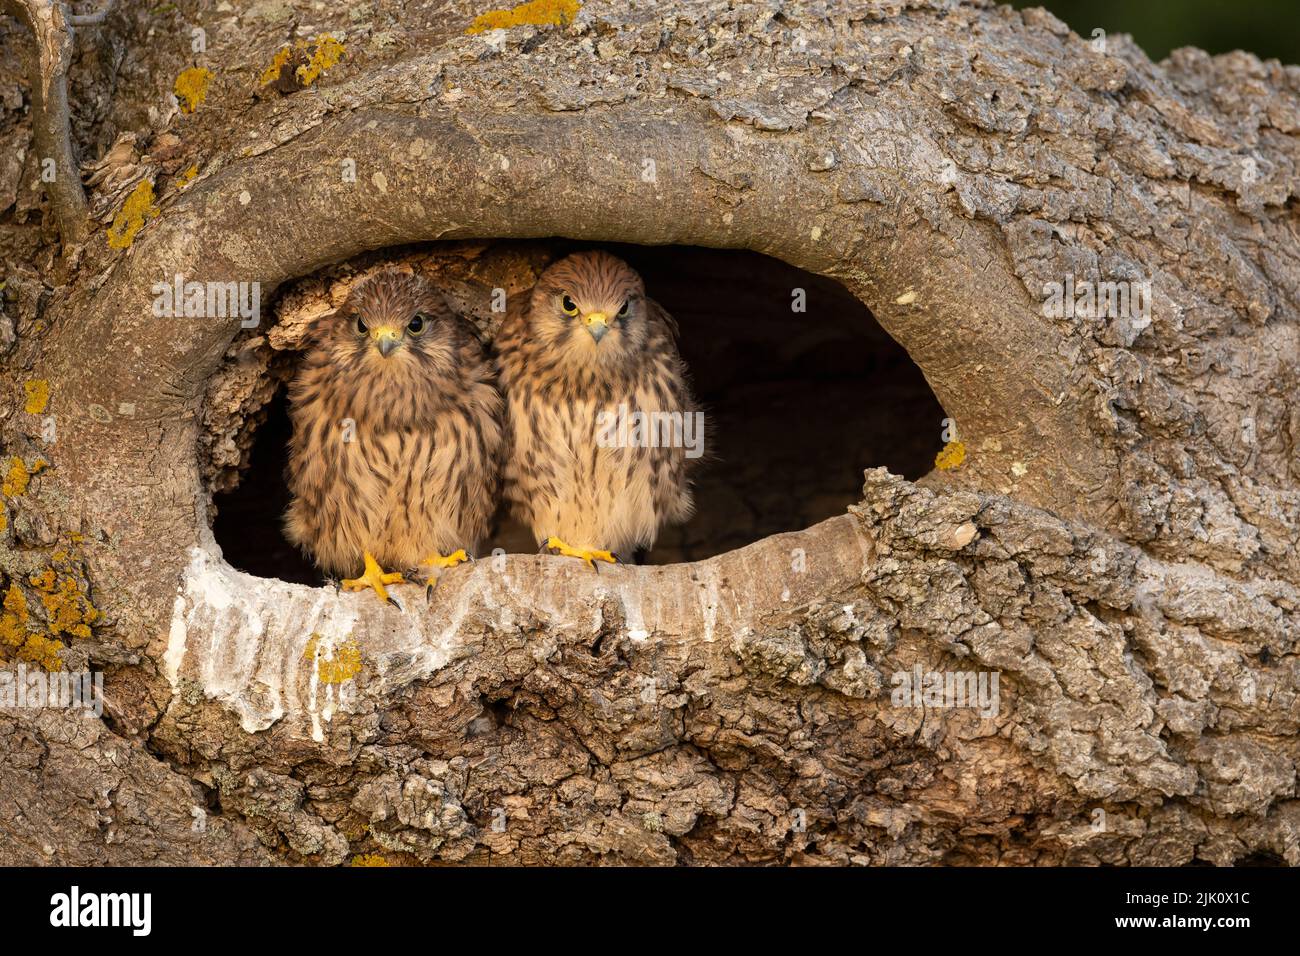 Young kestrels in their nest Stock Photo